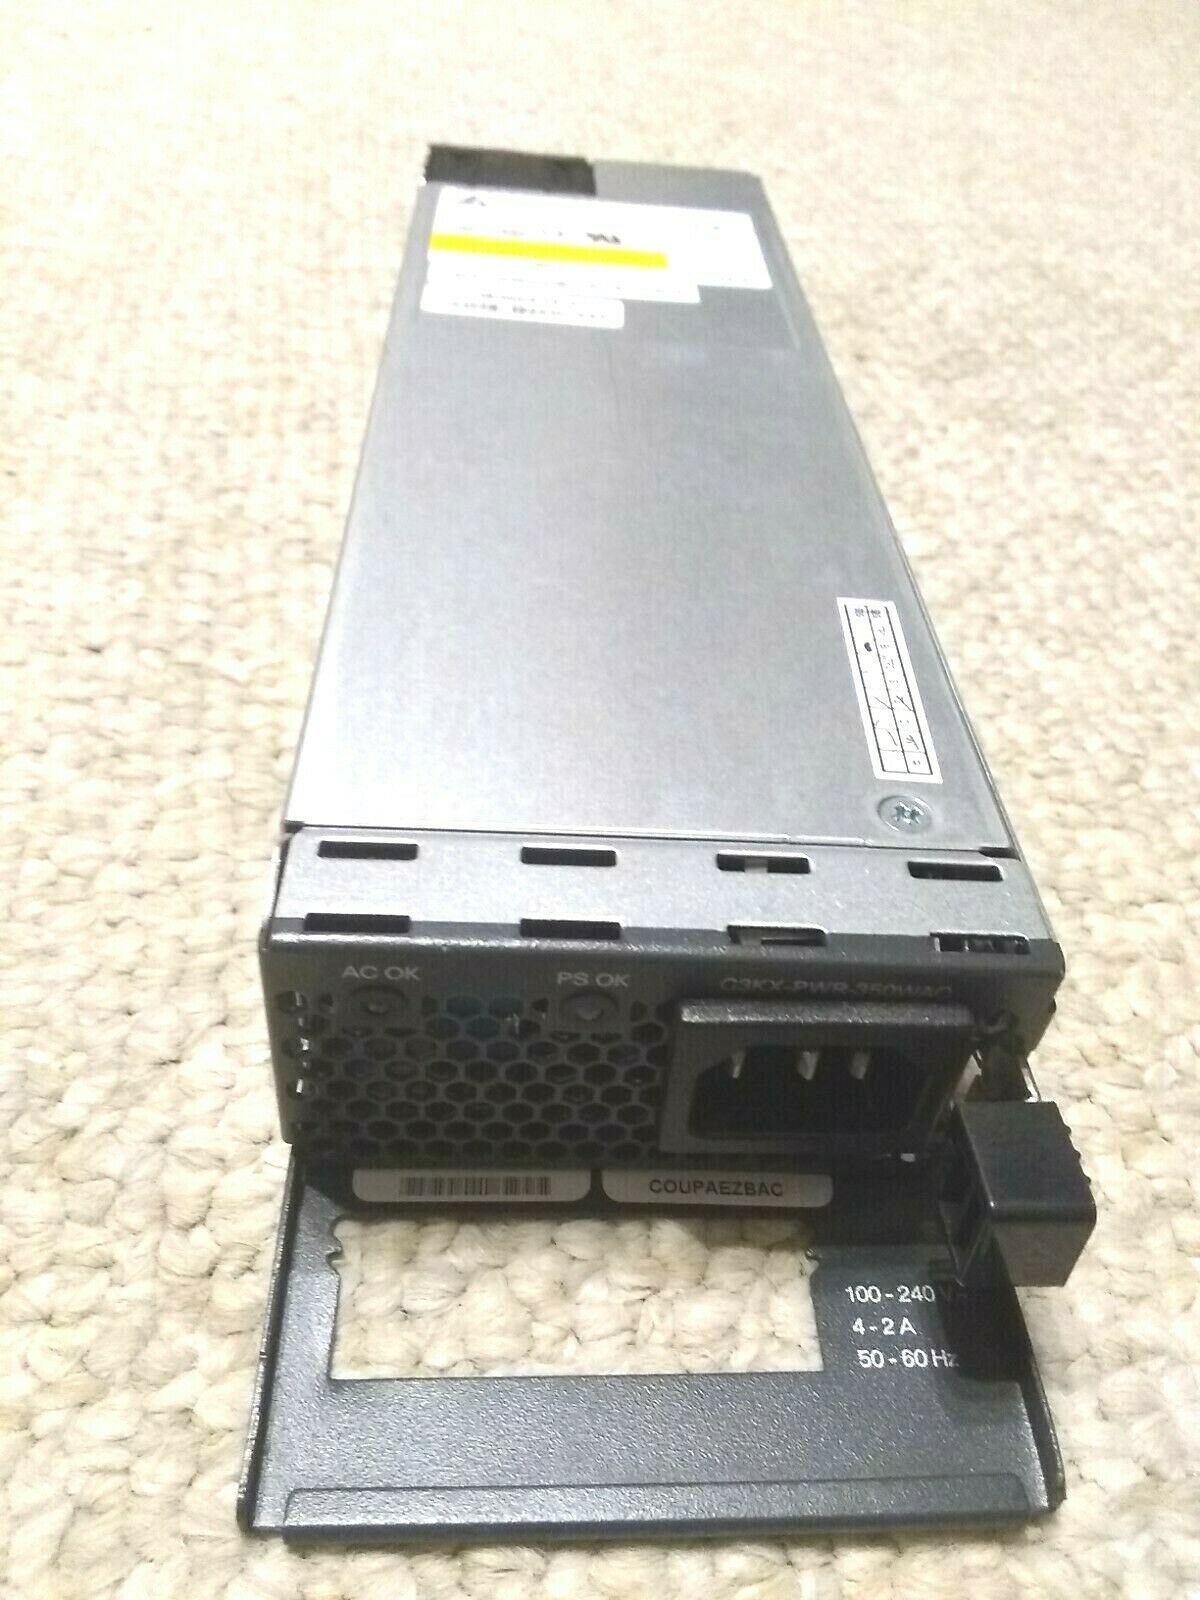 C3KX PWR 350WAC 341 0394 03 AA26270 edps 350cb a edps 350cb a cisco 350 watt ac power supply for 3560x and 3750x